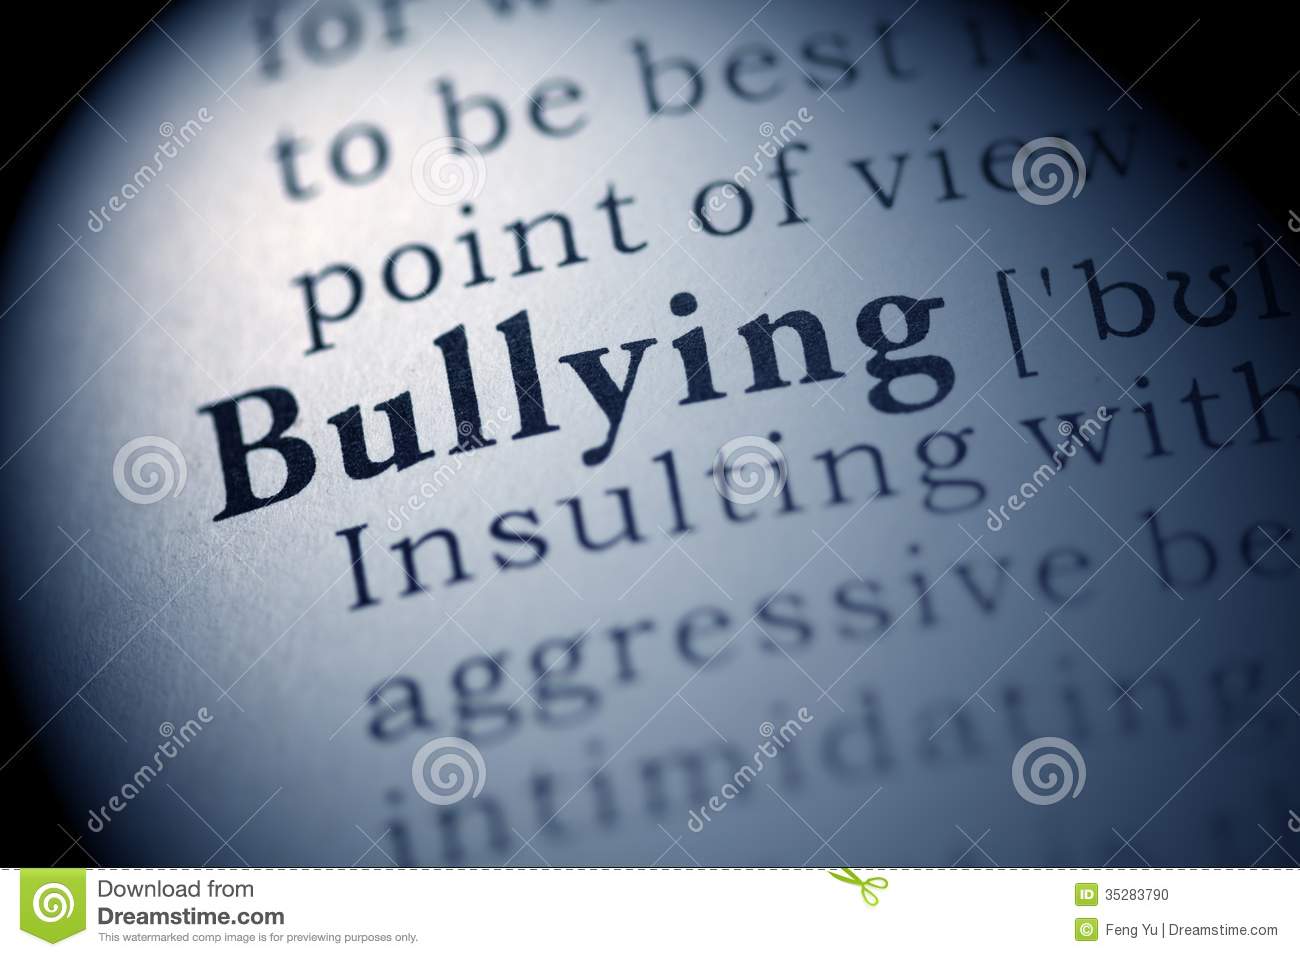 PPW- Bullying in the Workplace